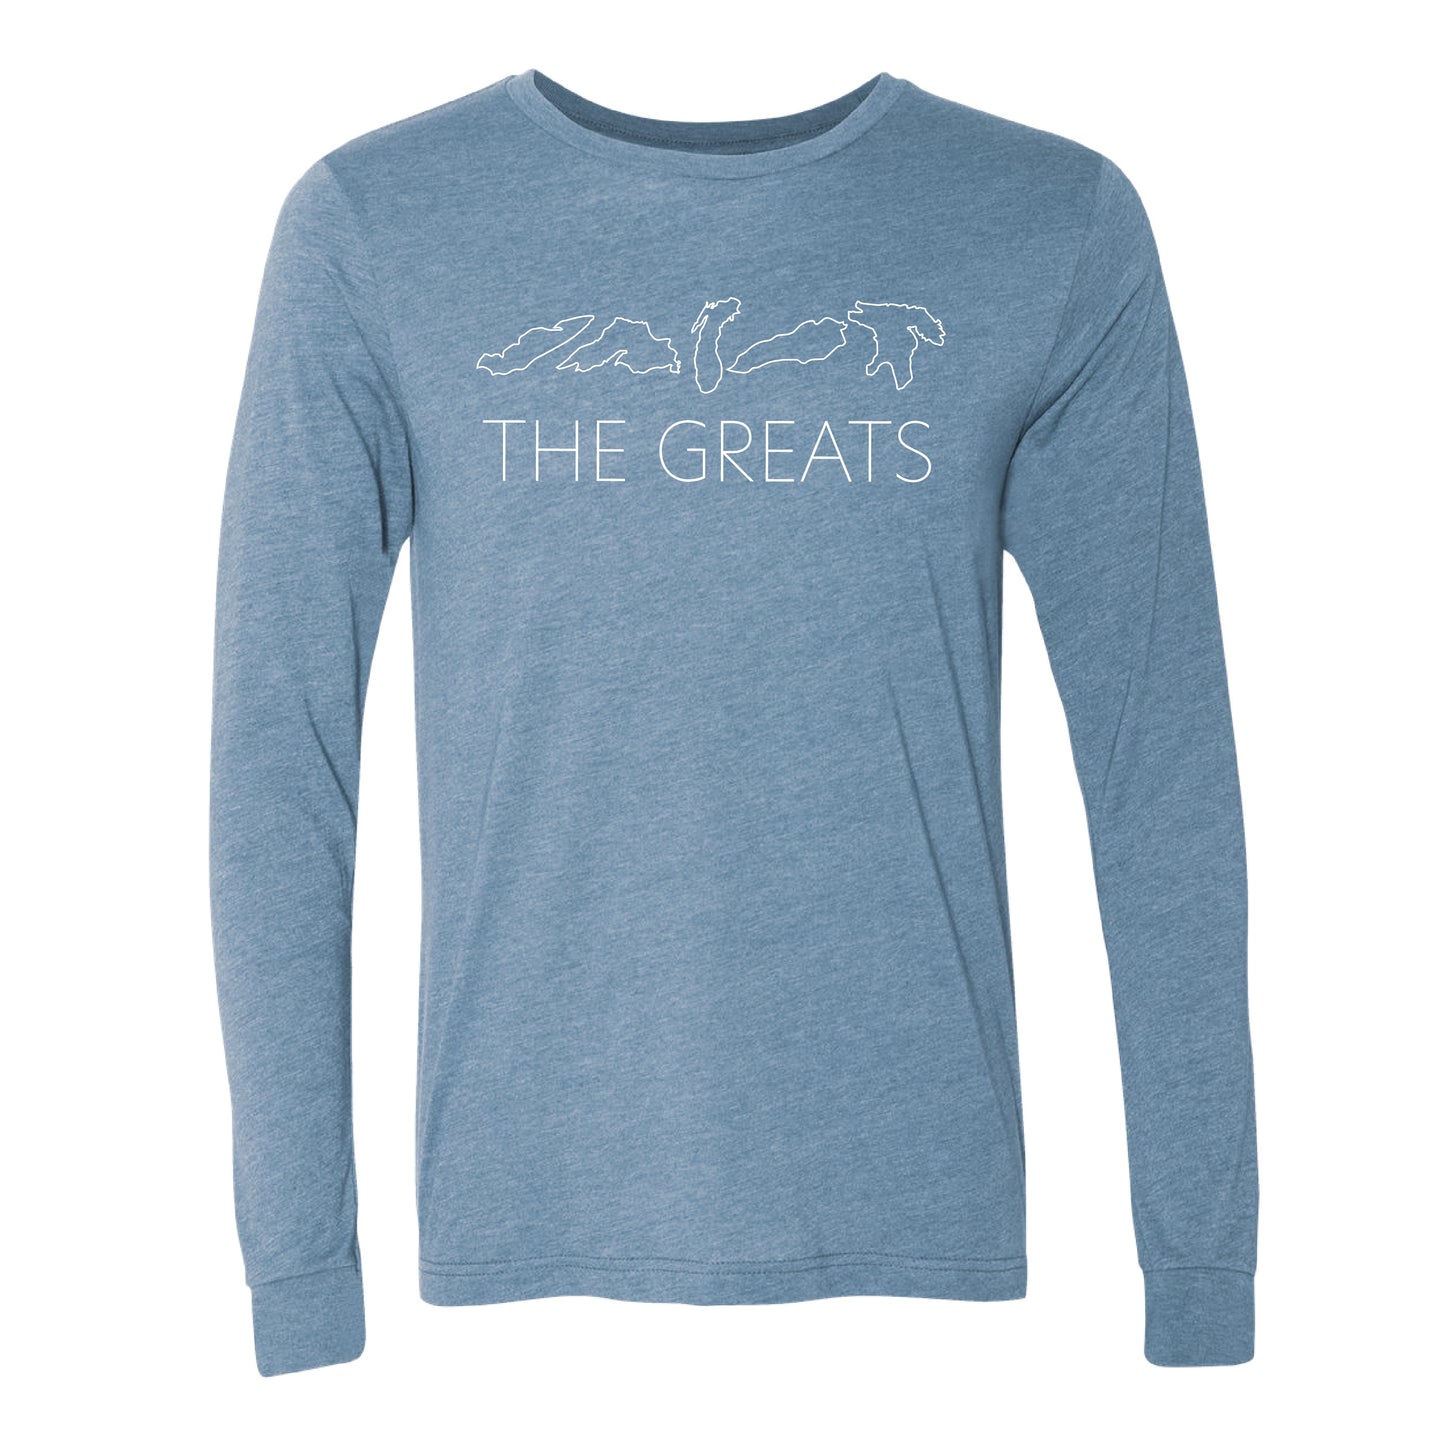 The Greats - Great Lakes Long Sleeve